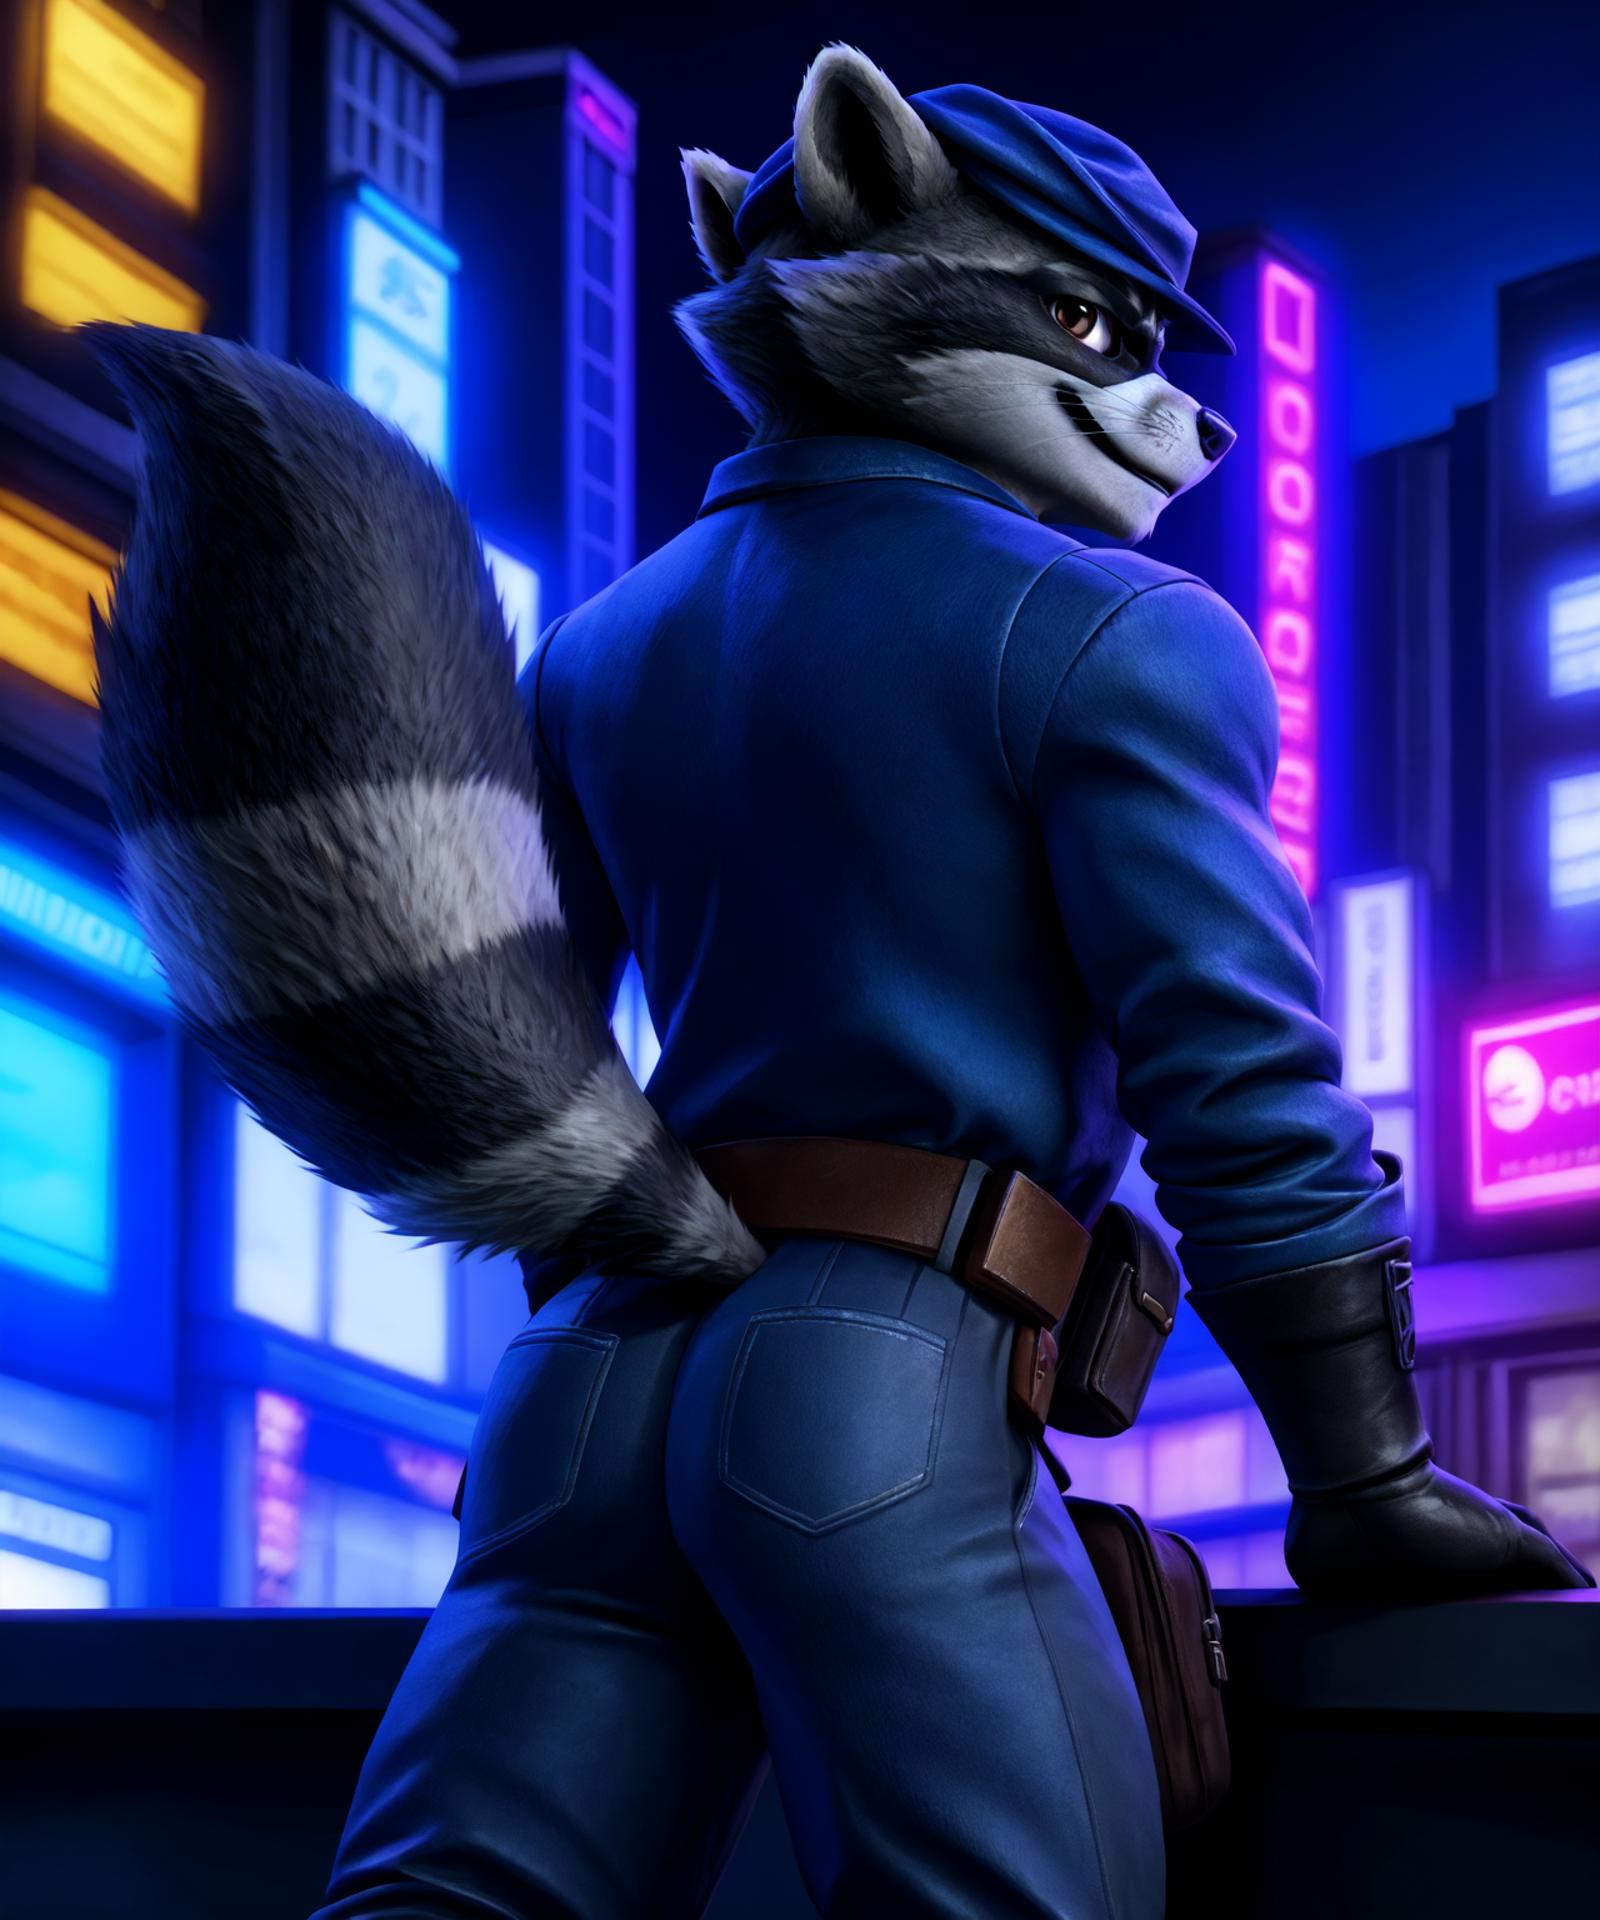 Sly Cooper (Movie Version) image by Mexlicano